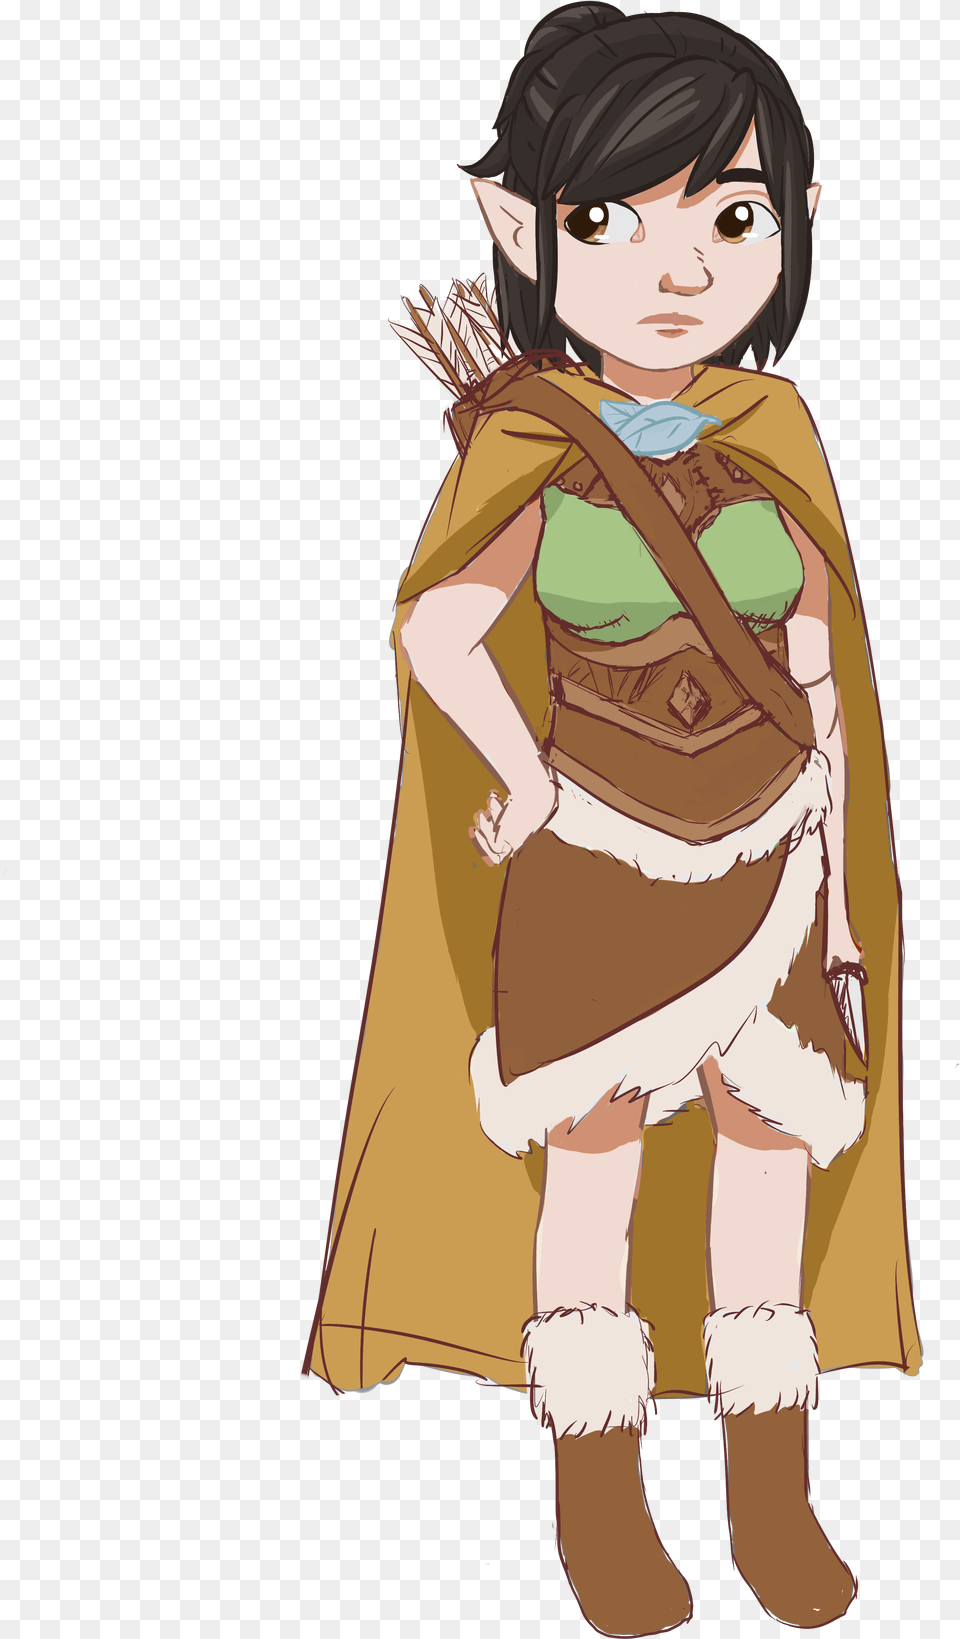 My Dnd Character A Halfling Girl Cartoon, Cape, Clothing, Fashion, Baby Png Image